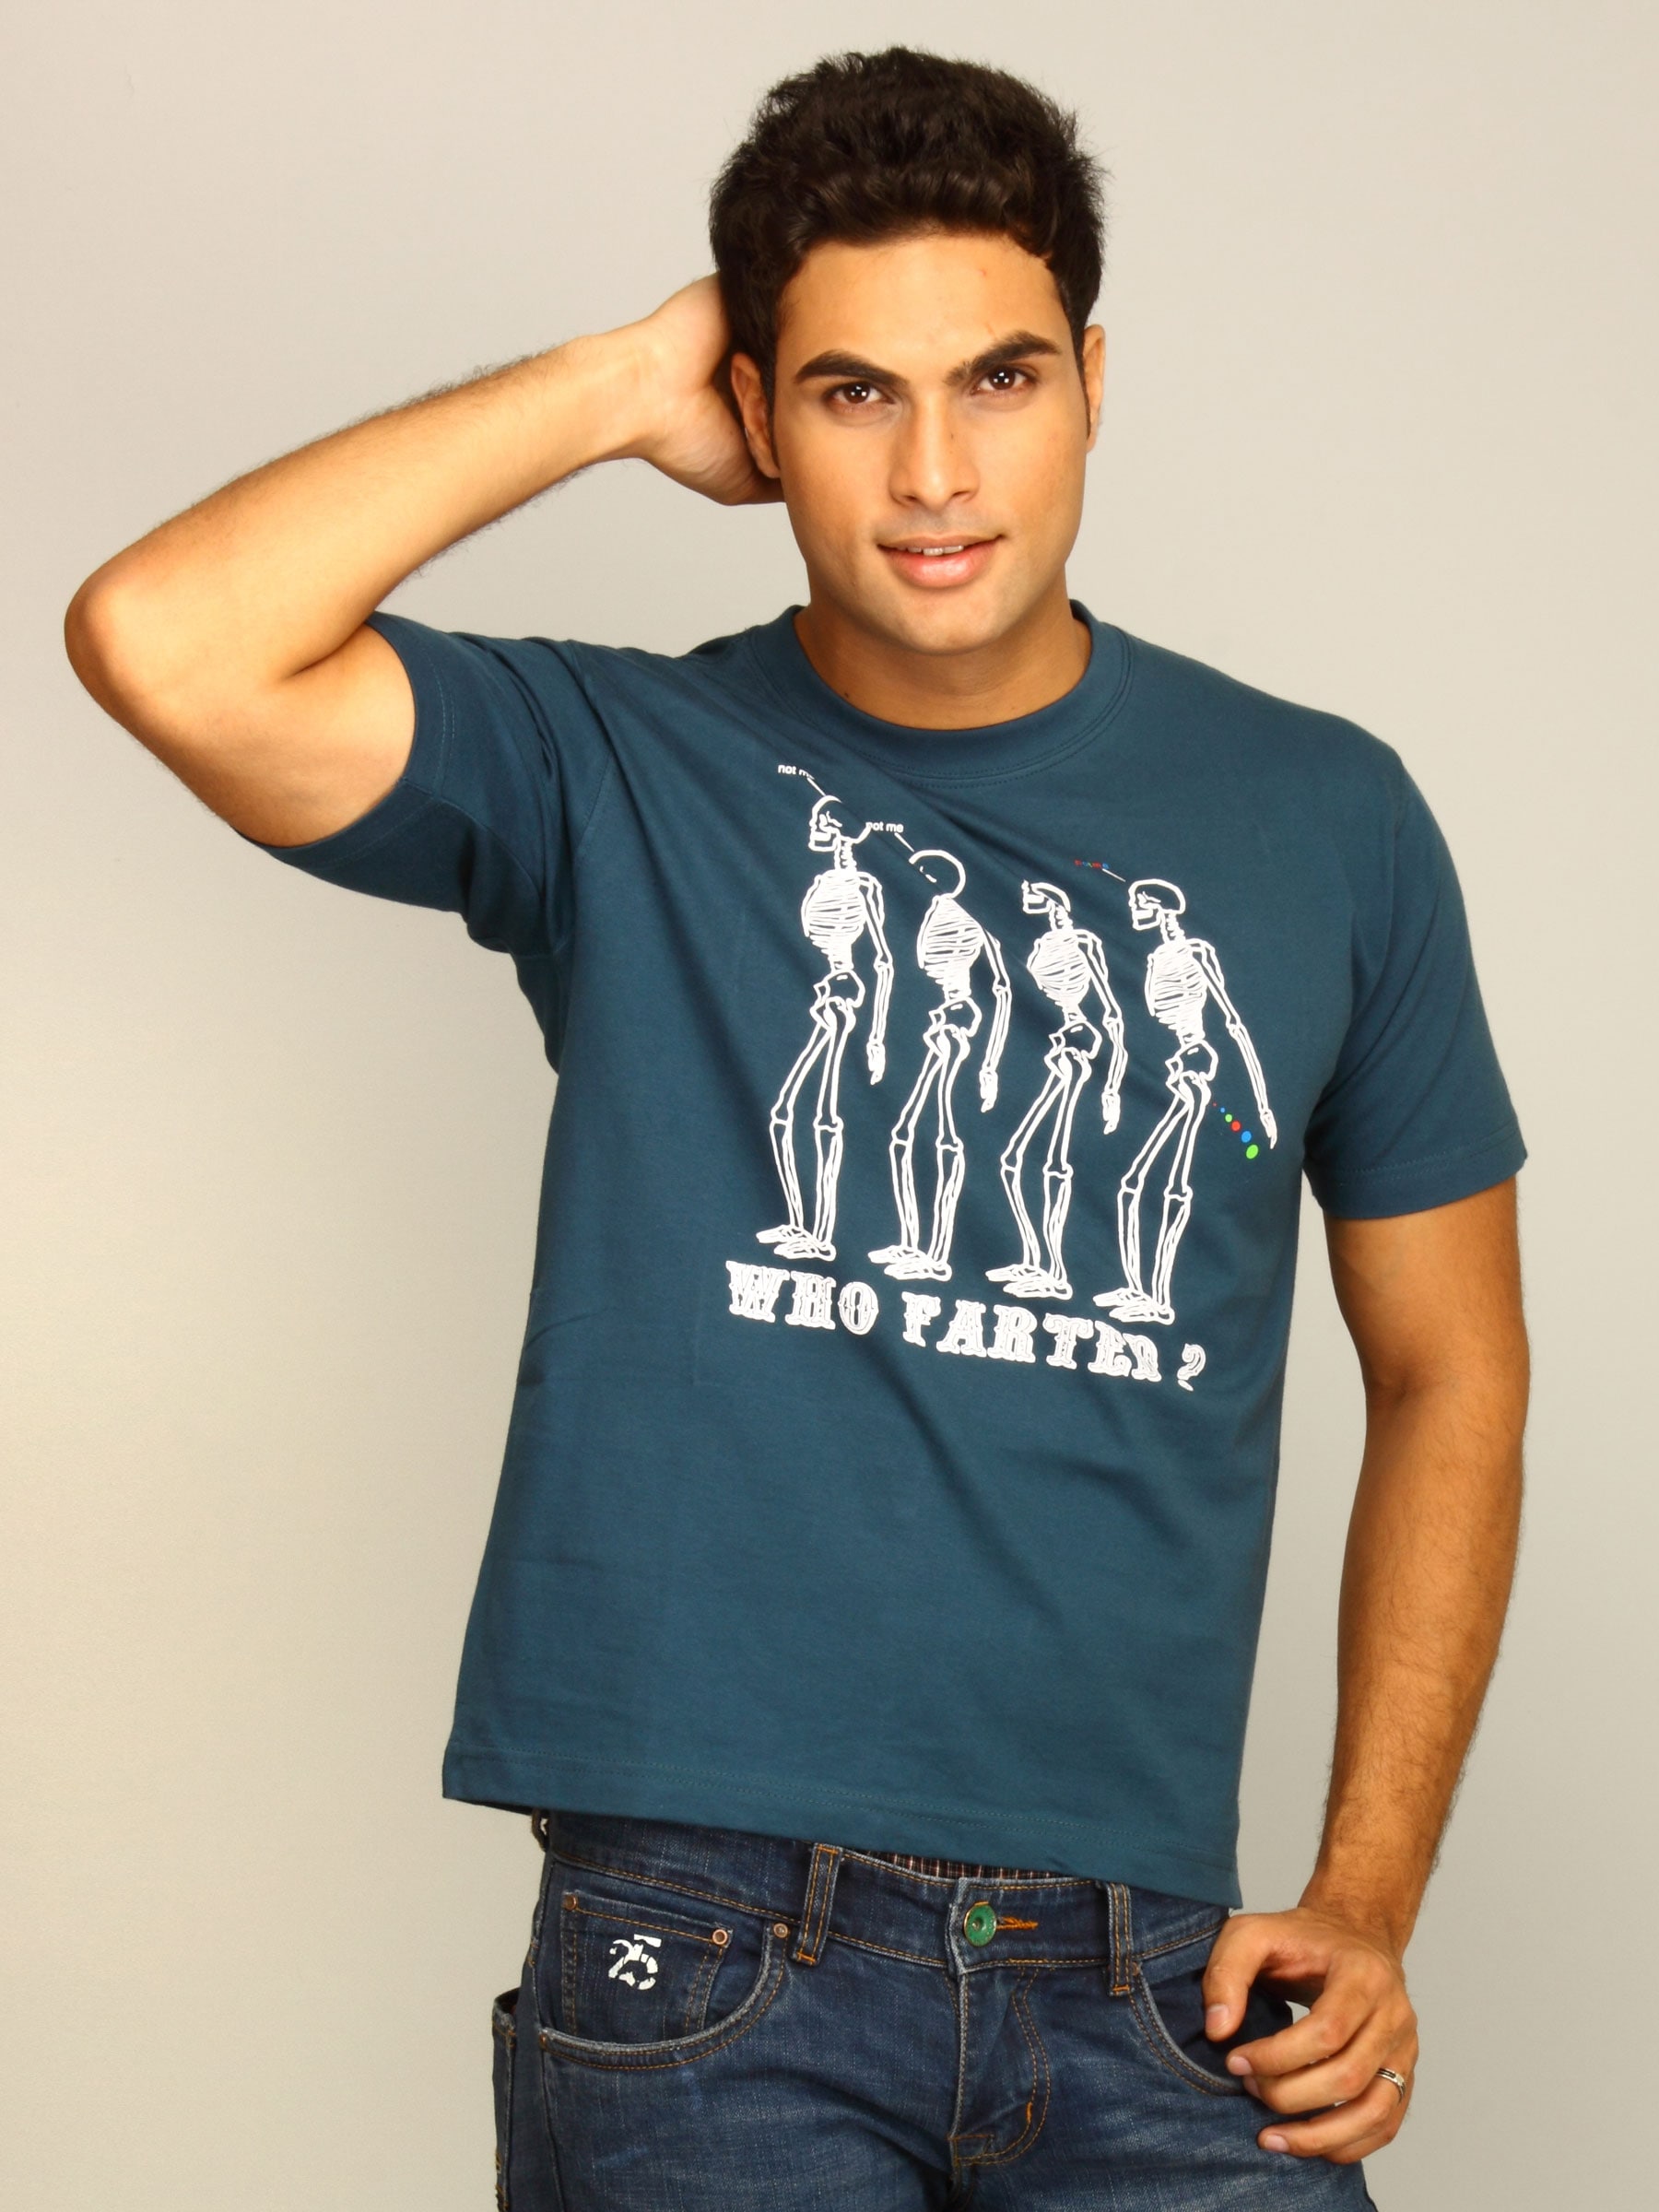 Tantra Men's Who Farted Blue T-shirt